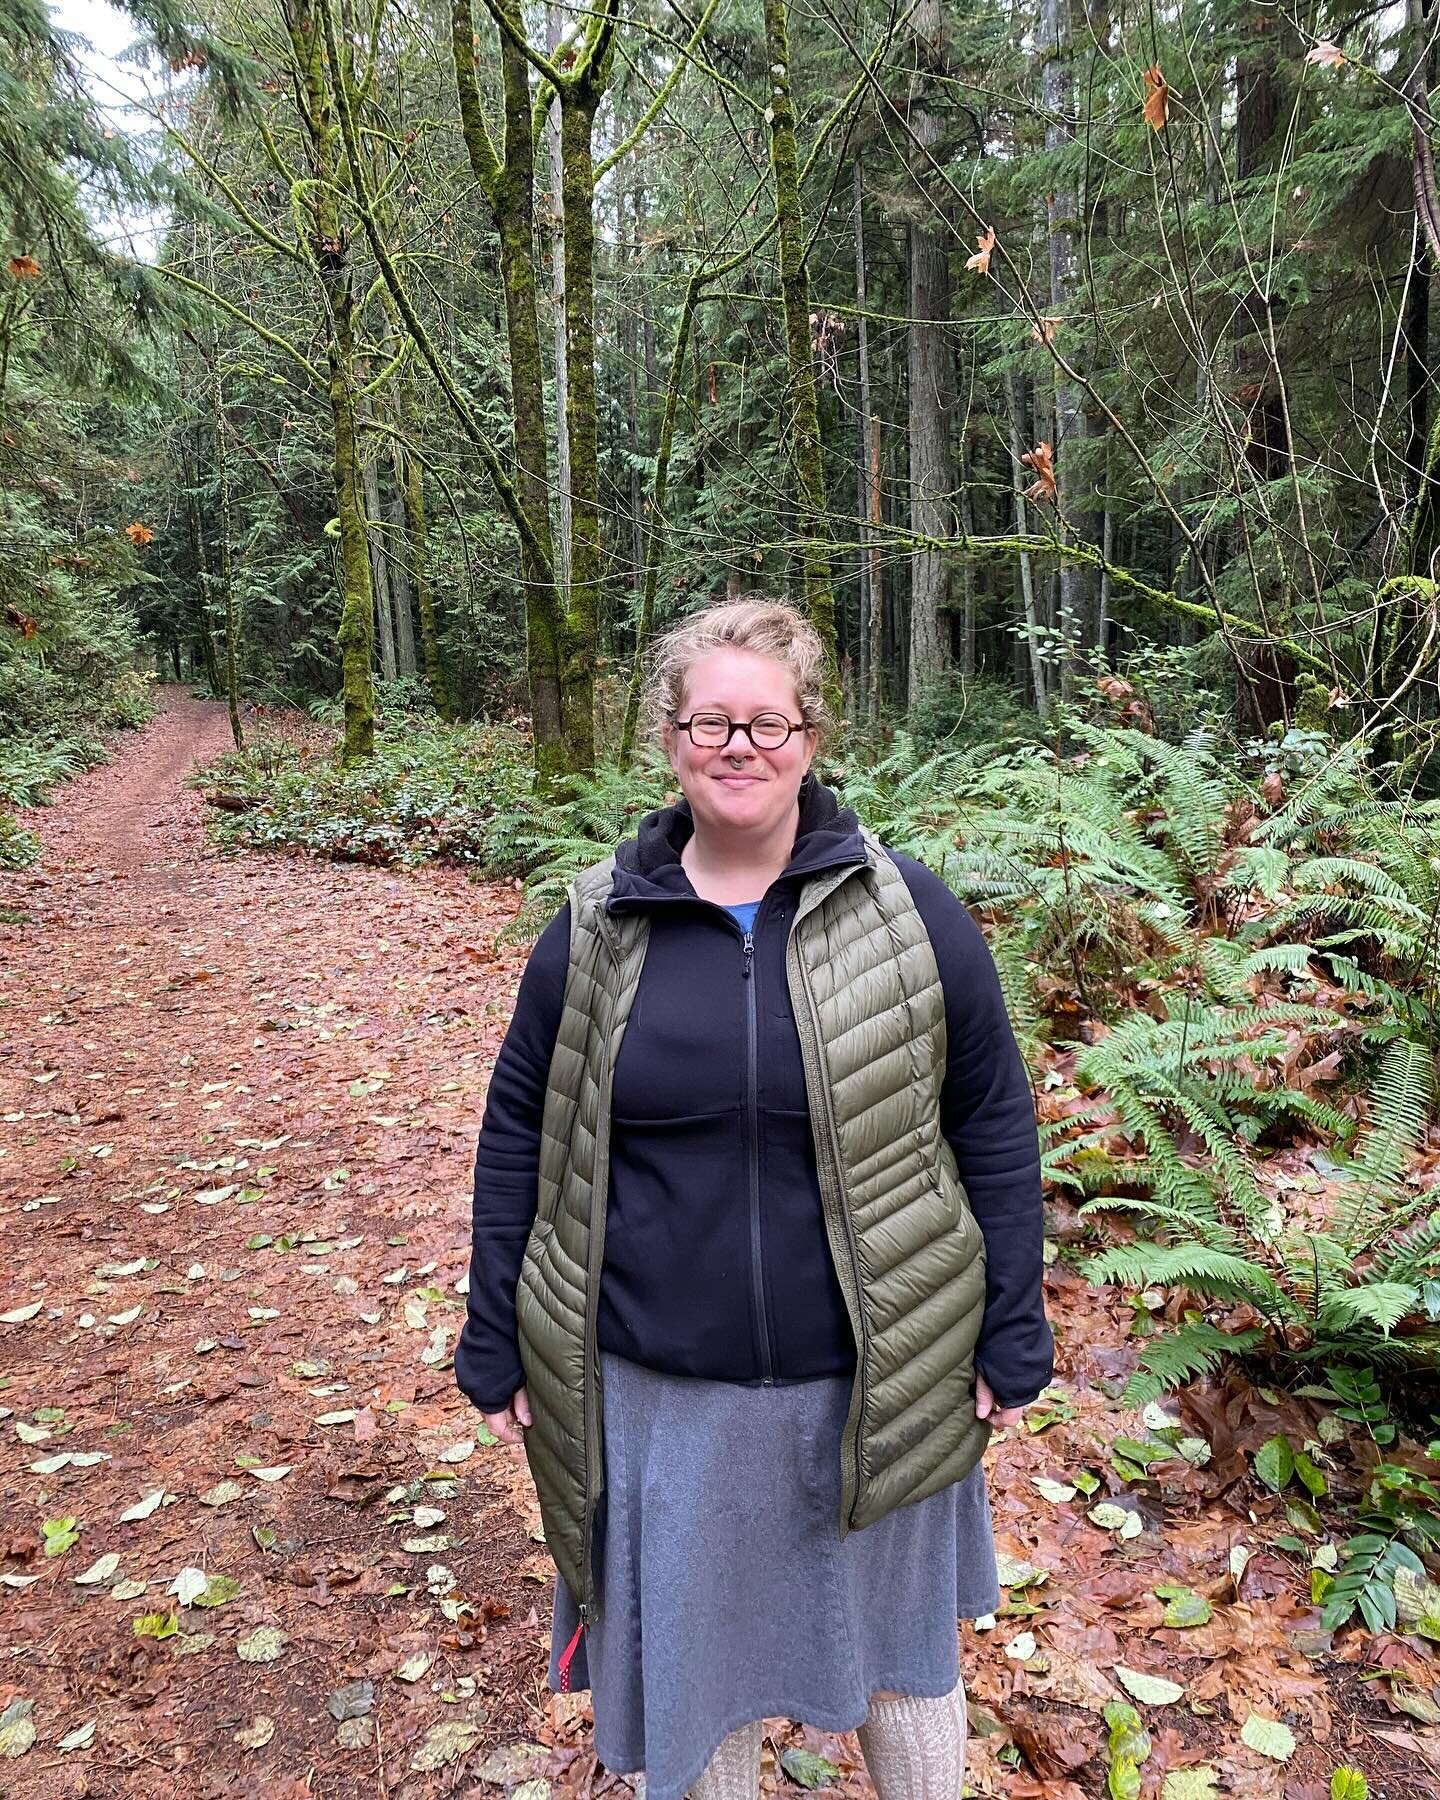 It was 6 months ago today that I finished the 3000+ mile road trip from MA to my new home in Bremerton. My partner Tom took this photo a few weeks ago in Ilahee Preserve, one of my favorite places and I can honestly say that I&rsquo;m the happiest I&